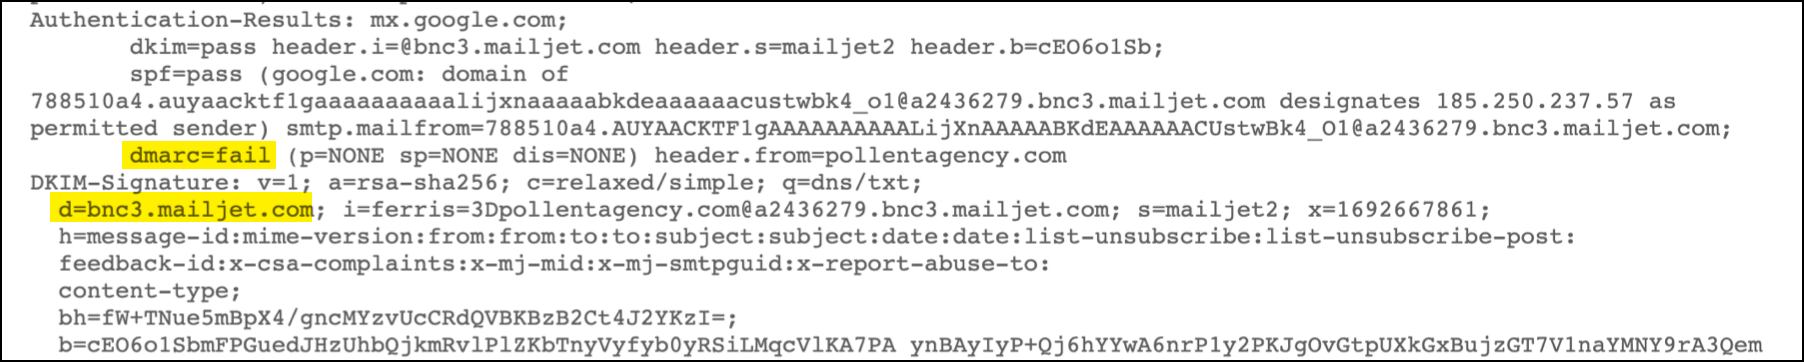 DKIM headers from GMass stripped by MailJet